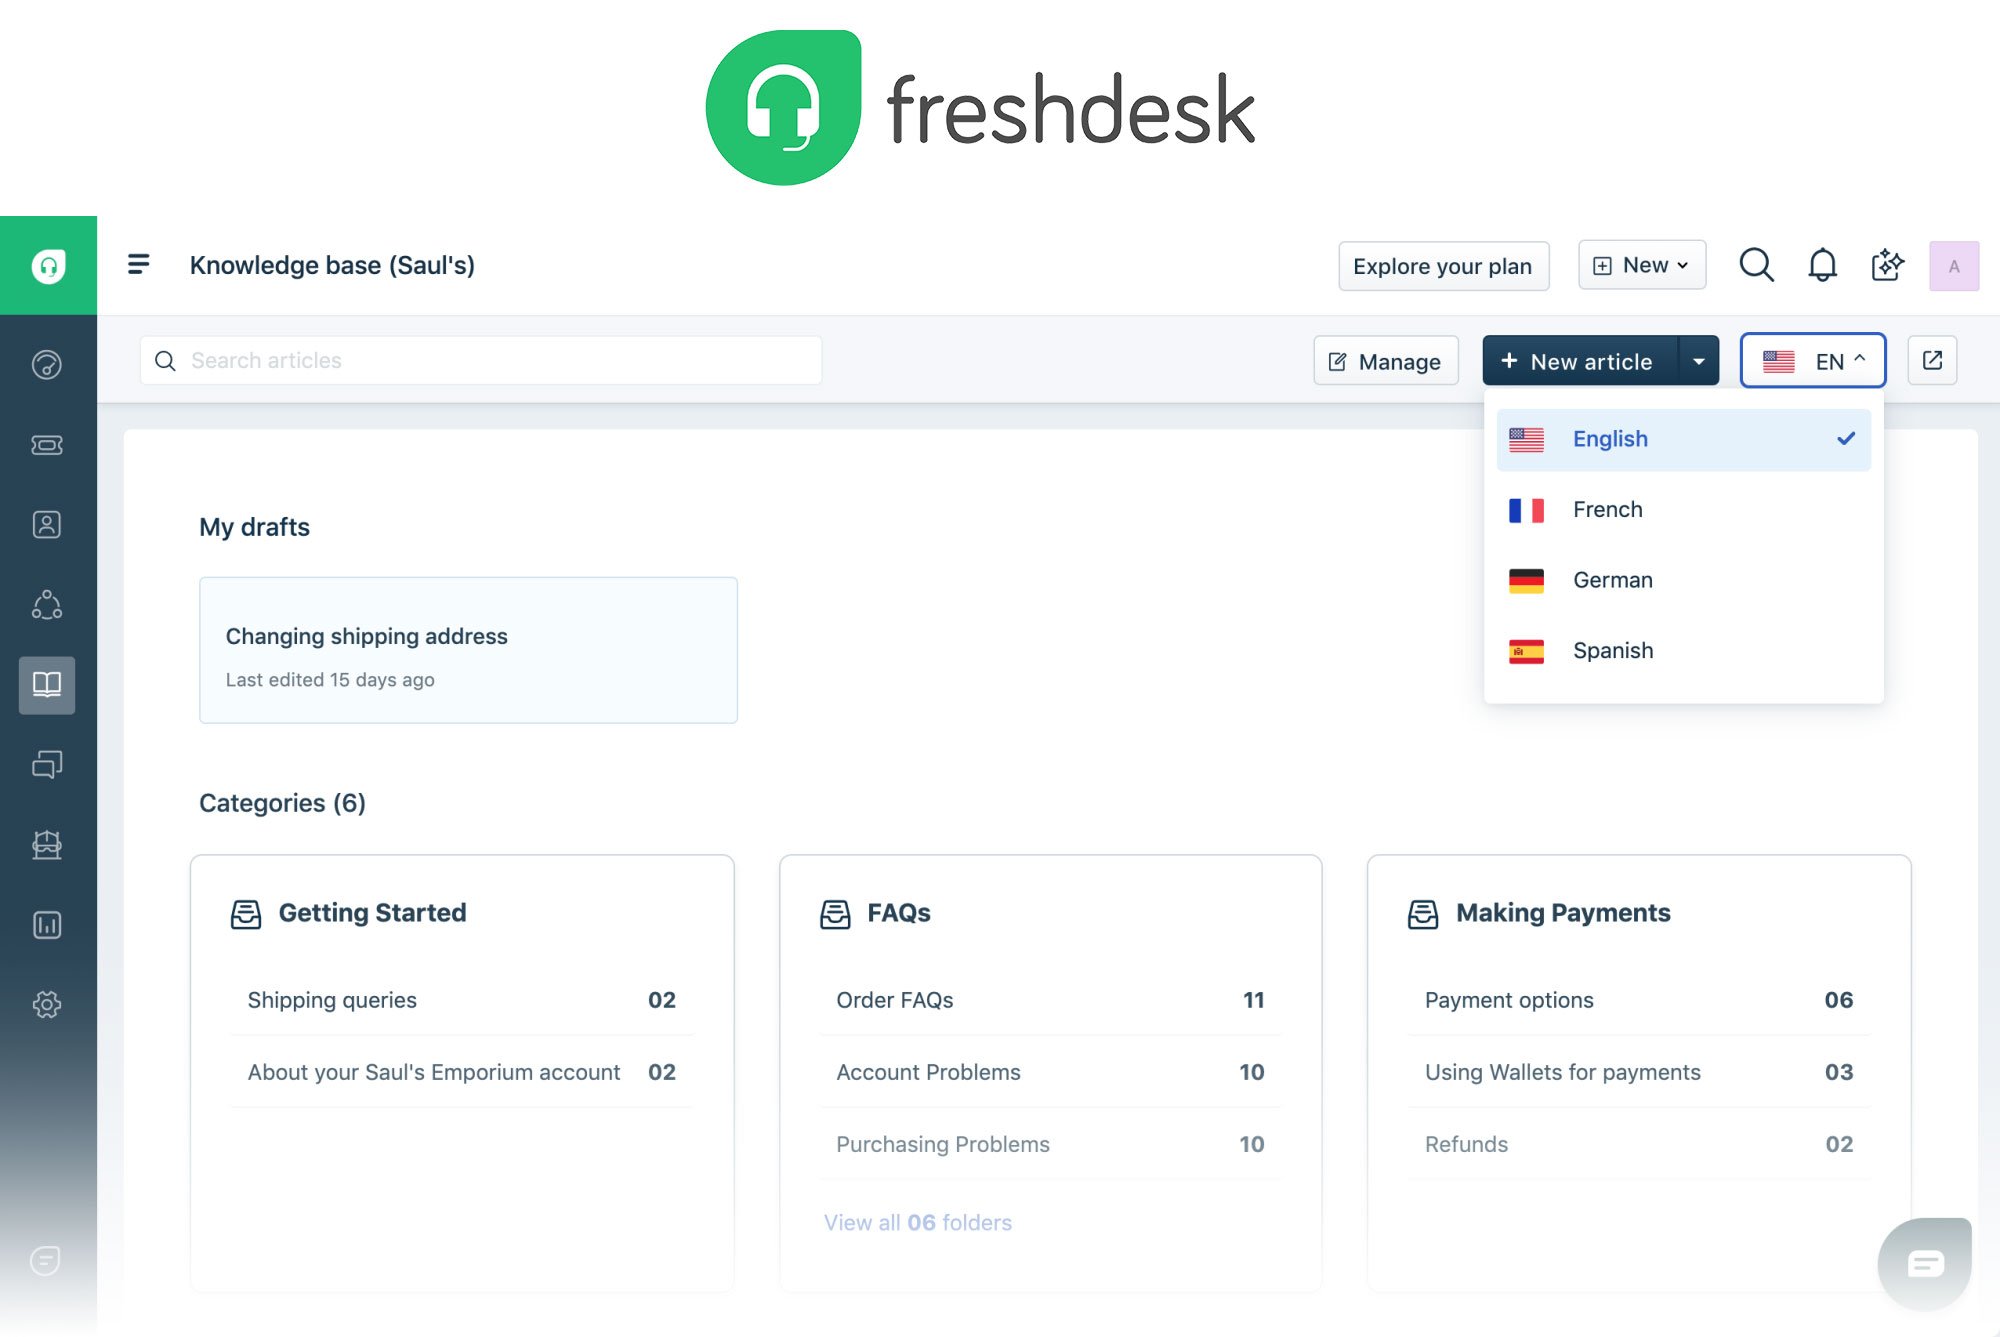 Freshdesk is a cloud-based customer support software that offers businesses of all sizes a wide range of features to streamline customer support.